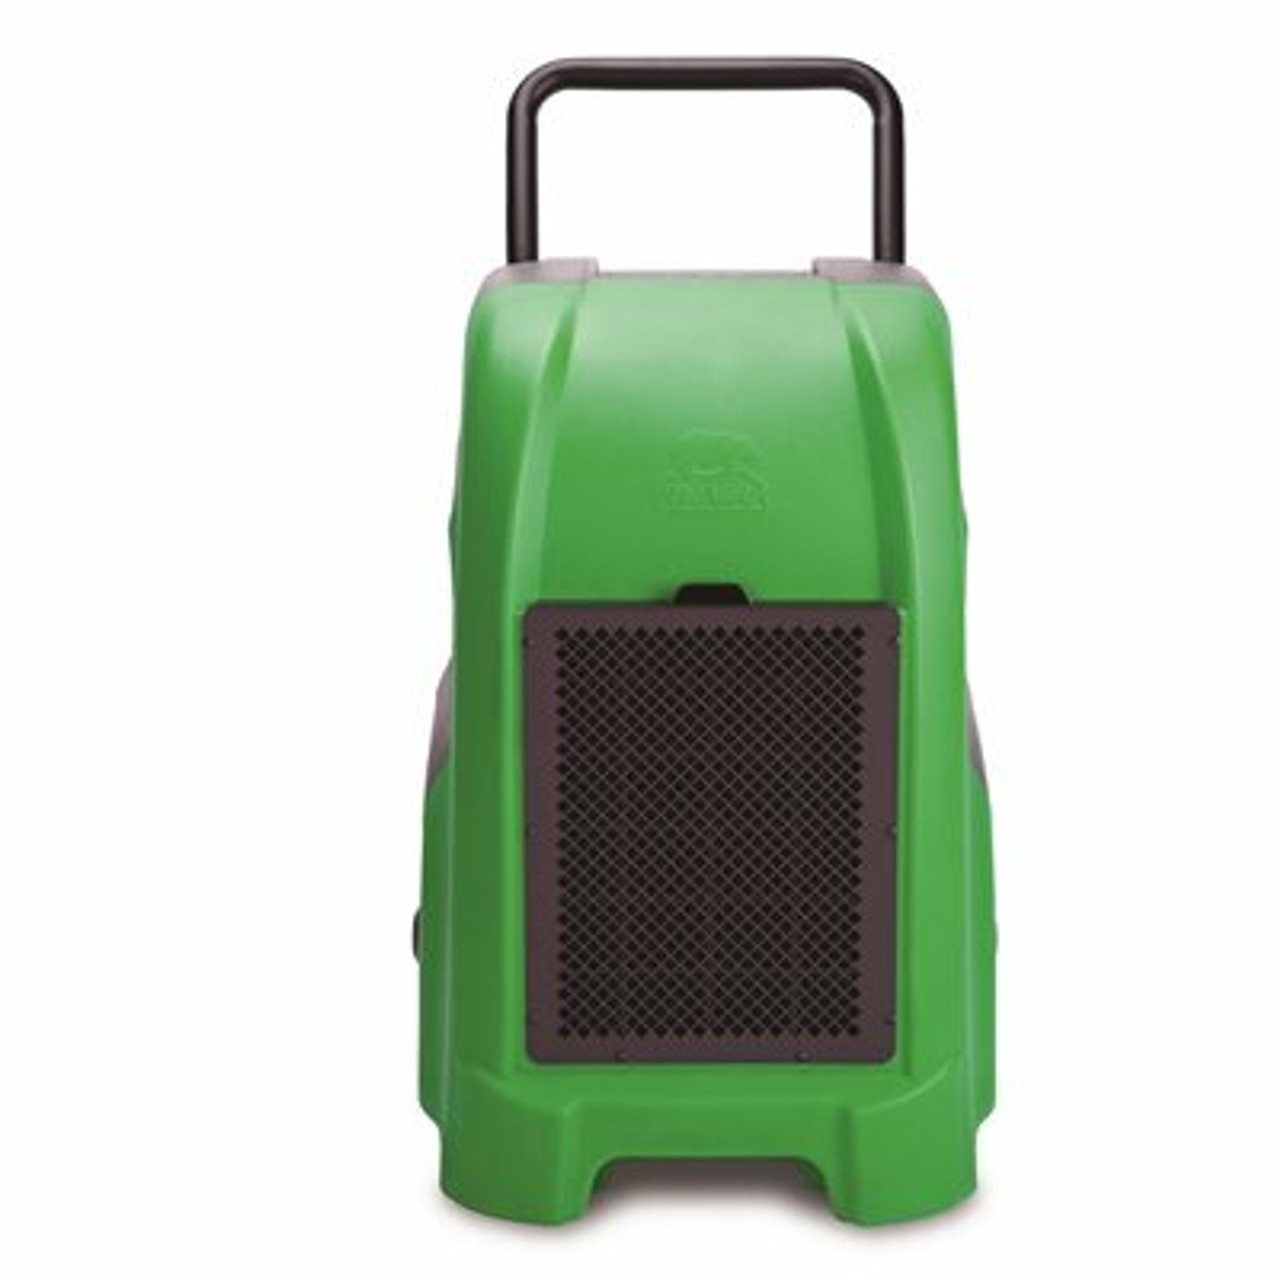 B-Air 150-Pint Commercial Dehumidifier Water Damage Restoration Mold Remediation In Green